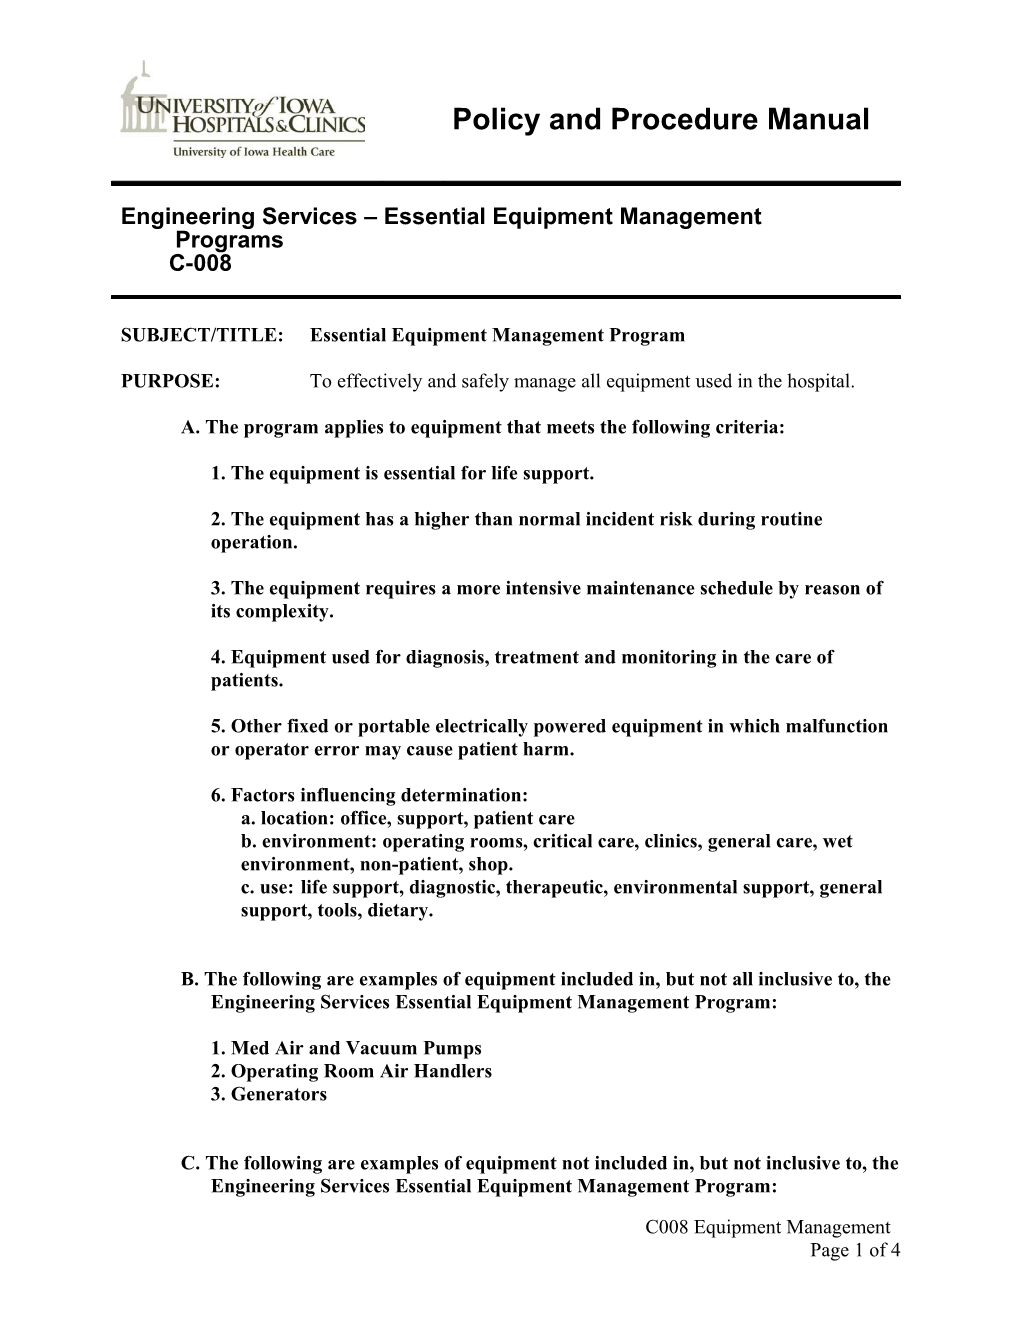 A. the Program Applies to Equipment That Meets the Following Criteria